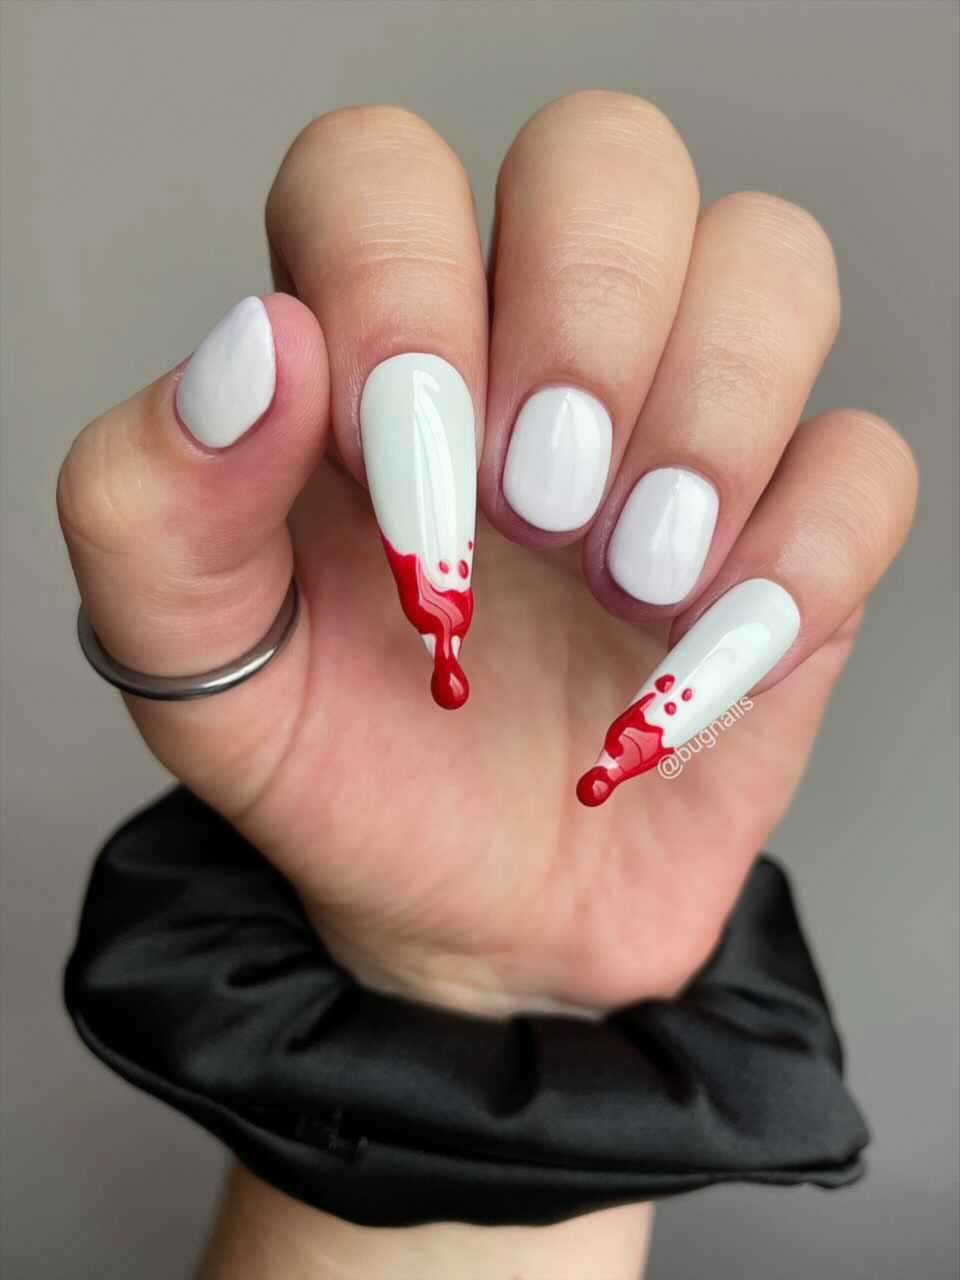 PHOTO: Vampire manicure from @bugnails on Instagram.